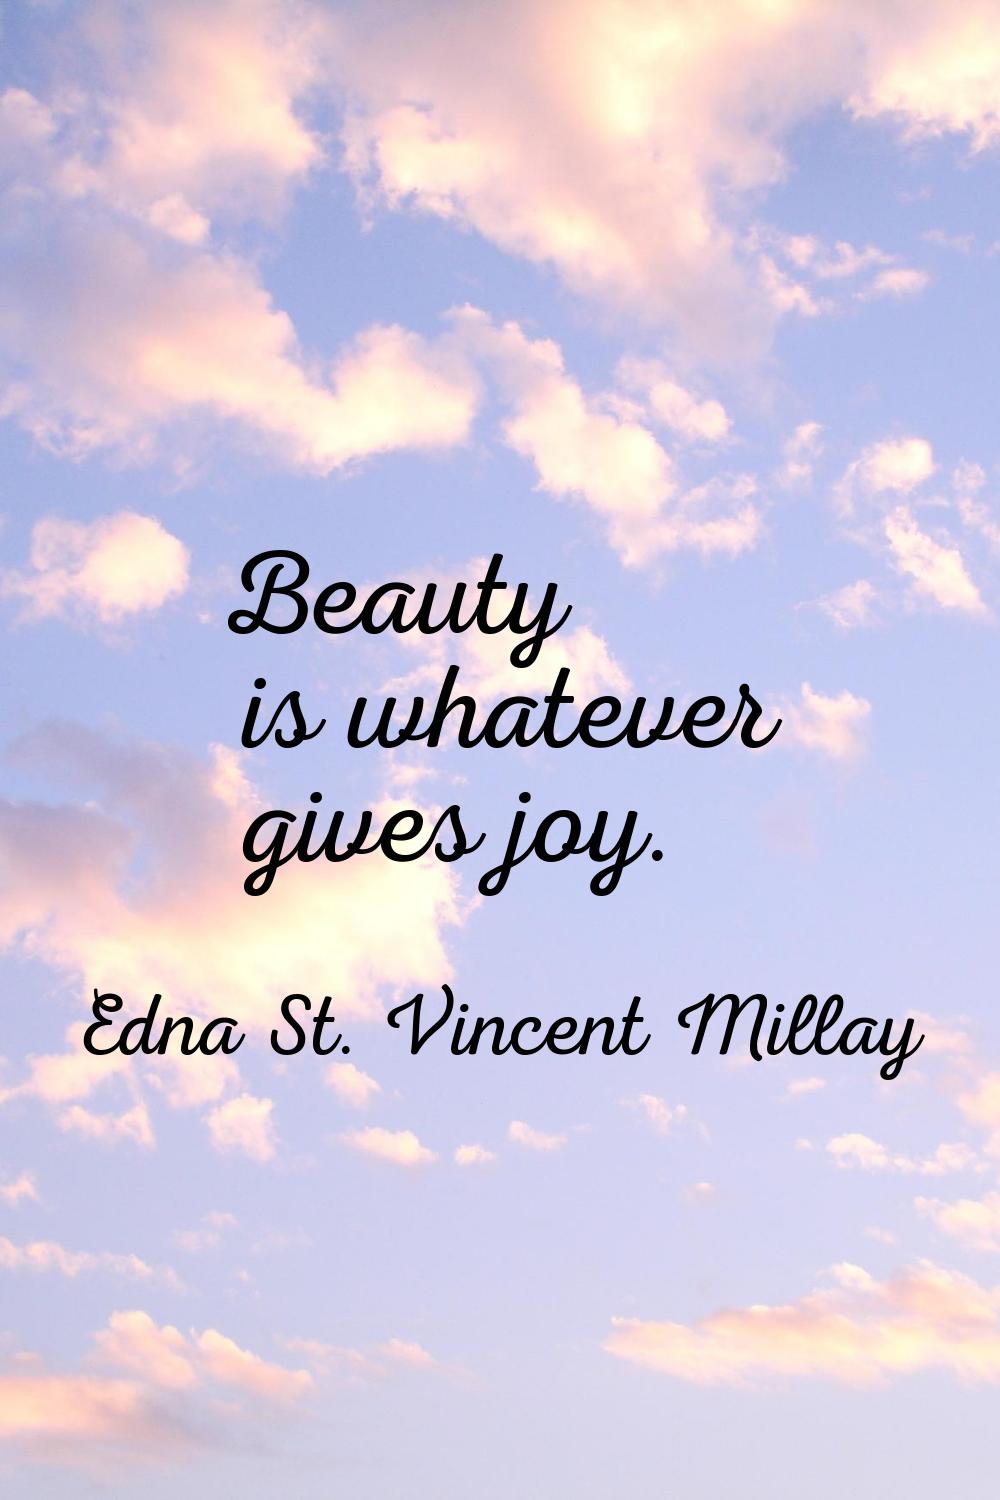 Beauty is whatever gives joy.